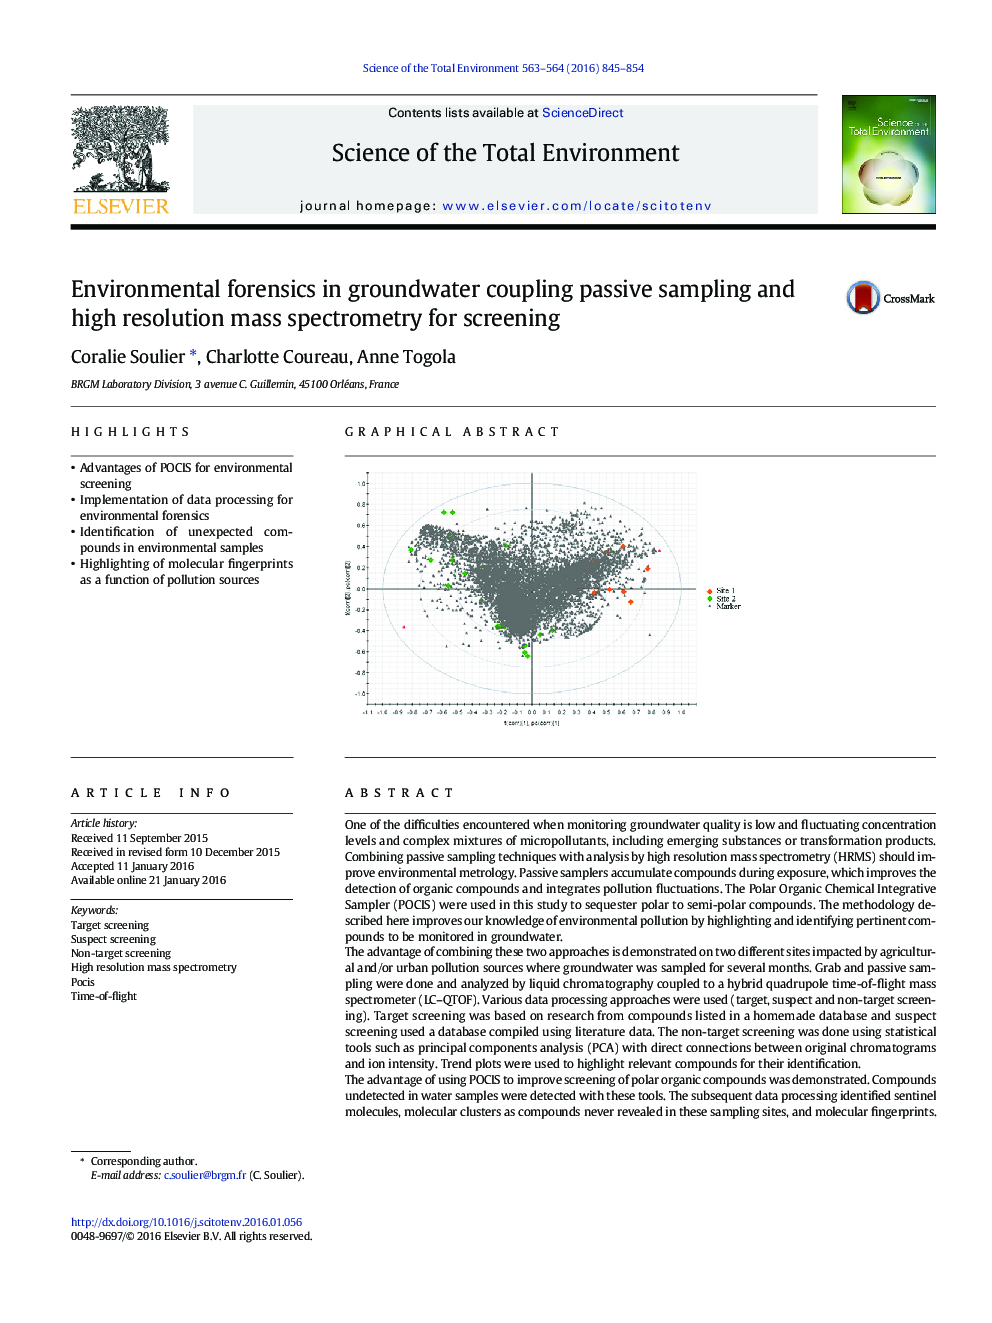 Environmental forensics in groundwater coupling passive sampling and high resolution mass spectrometry for screening